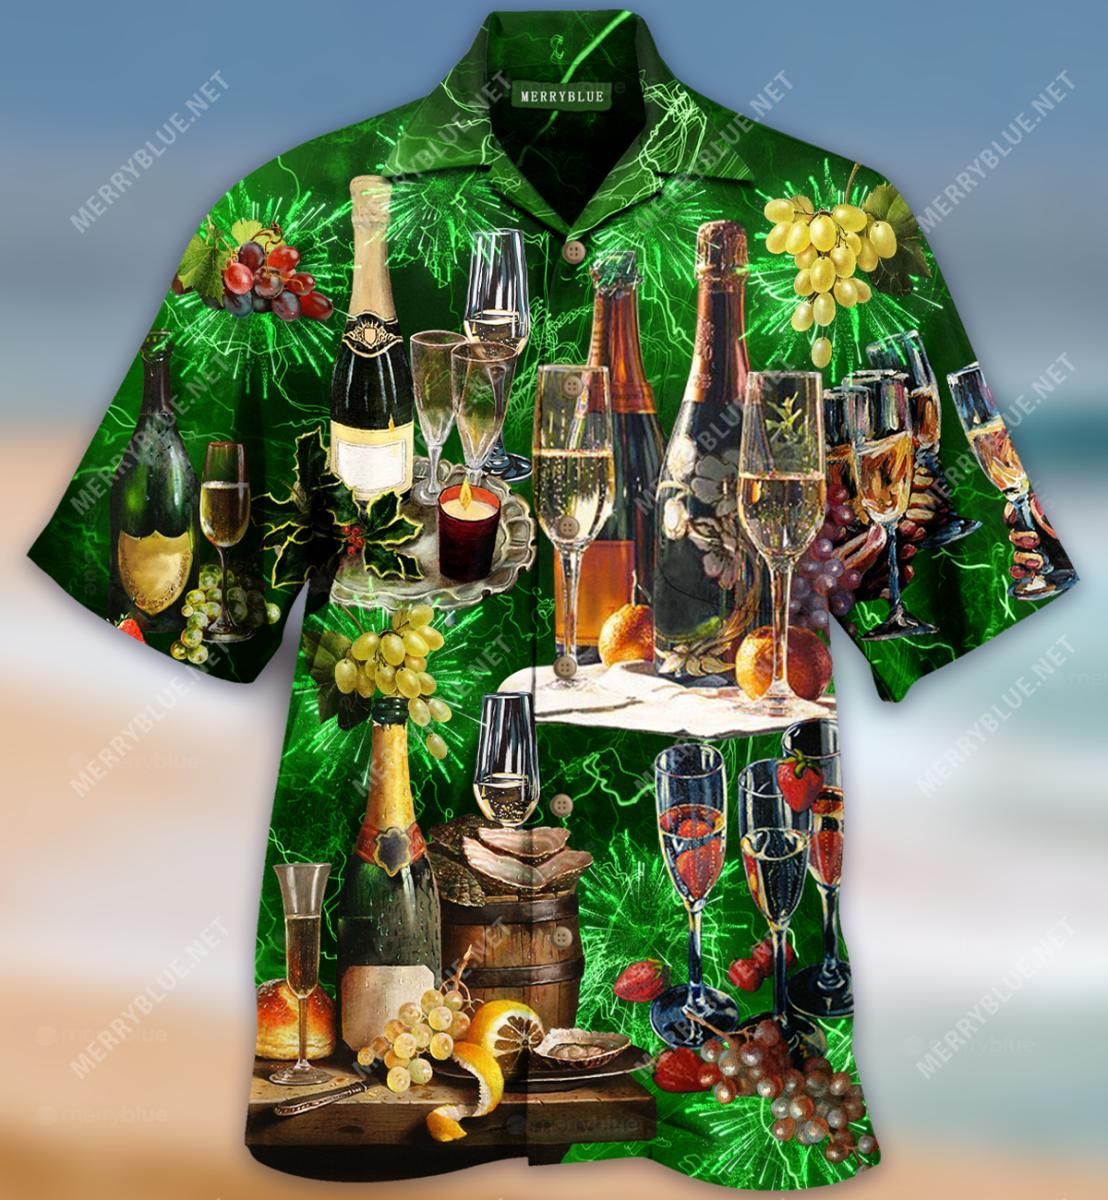 Come Quickly I'M Tasting The Star Aloha Hawaiian Shirt Colorful Short Sleeve Summer Beach Casual Shirt For Men And Women